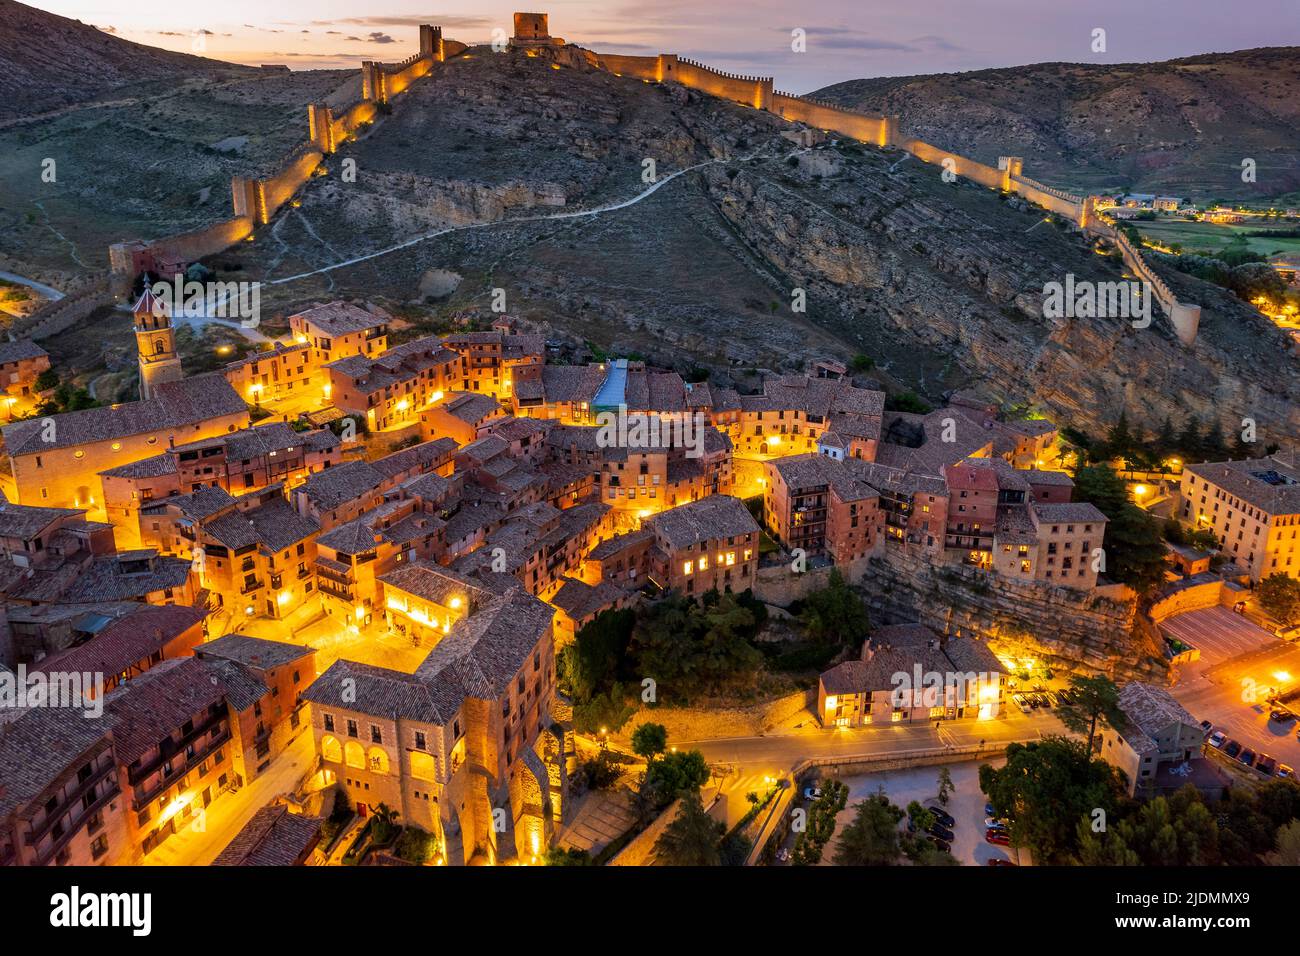 Aerial view of Albarracin with its ancient walls, Aragon, Spain Stock Photo